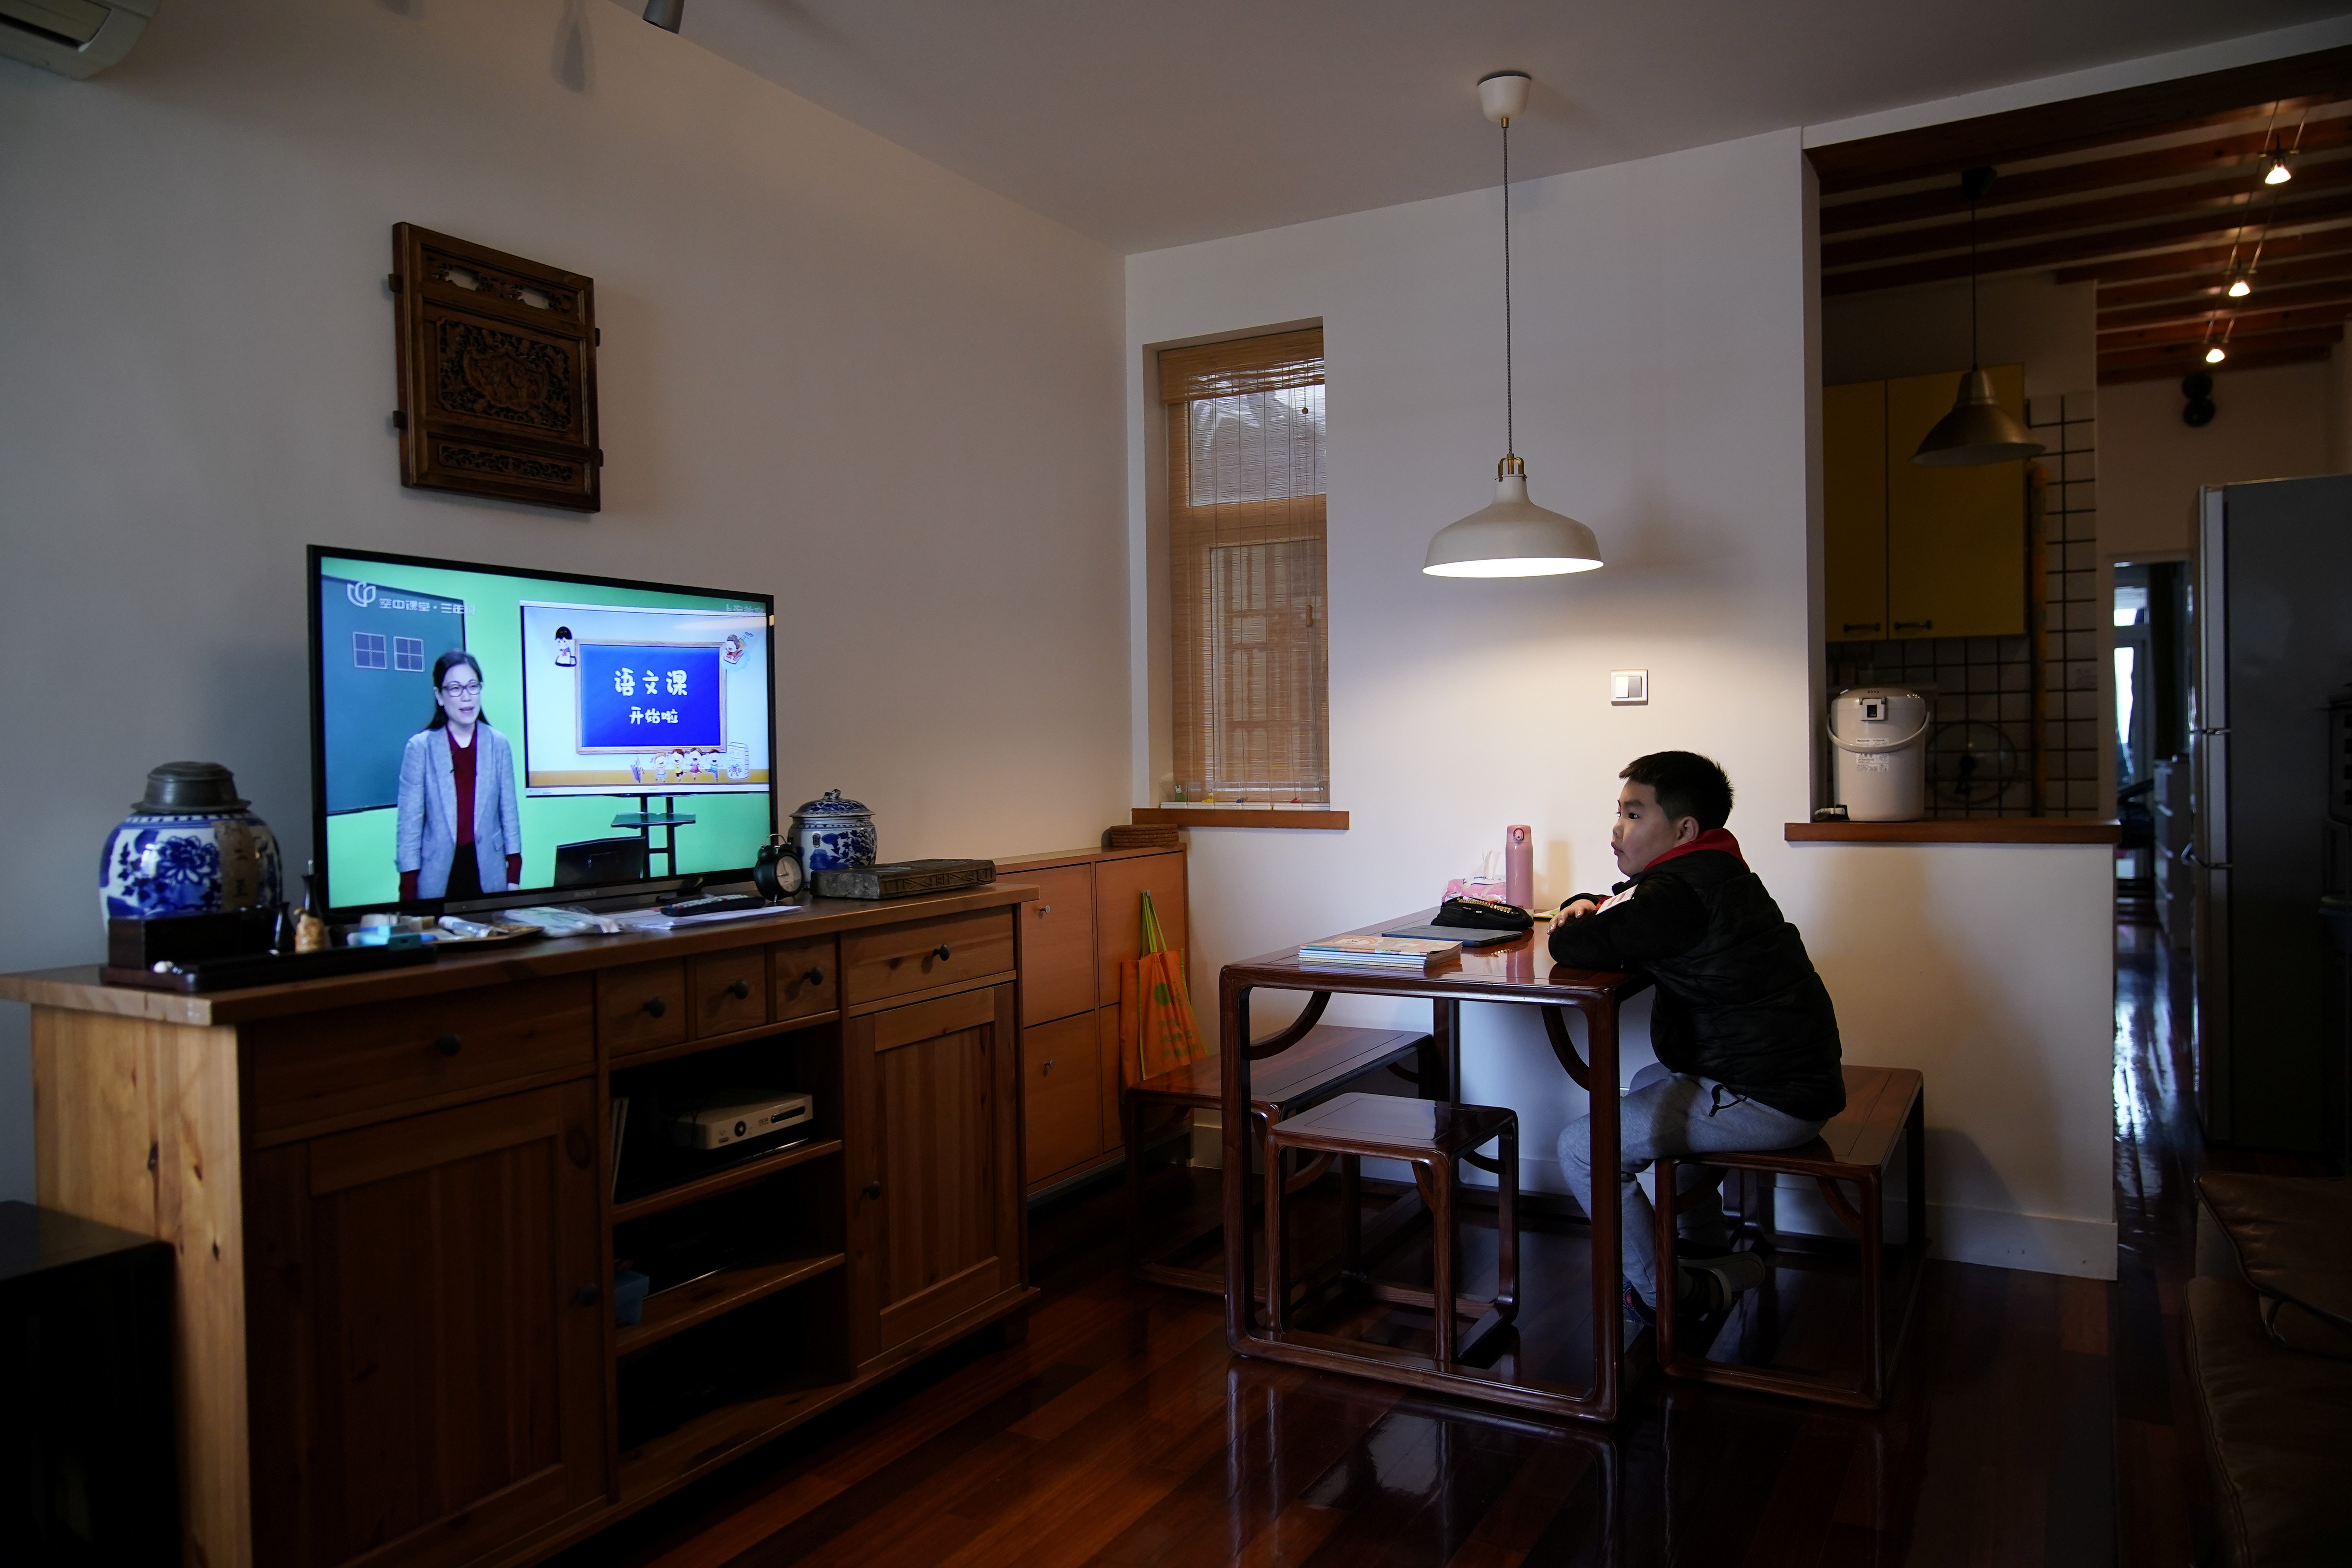 A primary school pupil attends an online class at home in Shanghai. With schools remaining closed for longer periods of time, students and teachers are expected to grow accustomed to online learning. Photo: Reuters